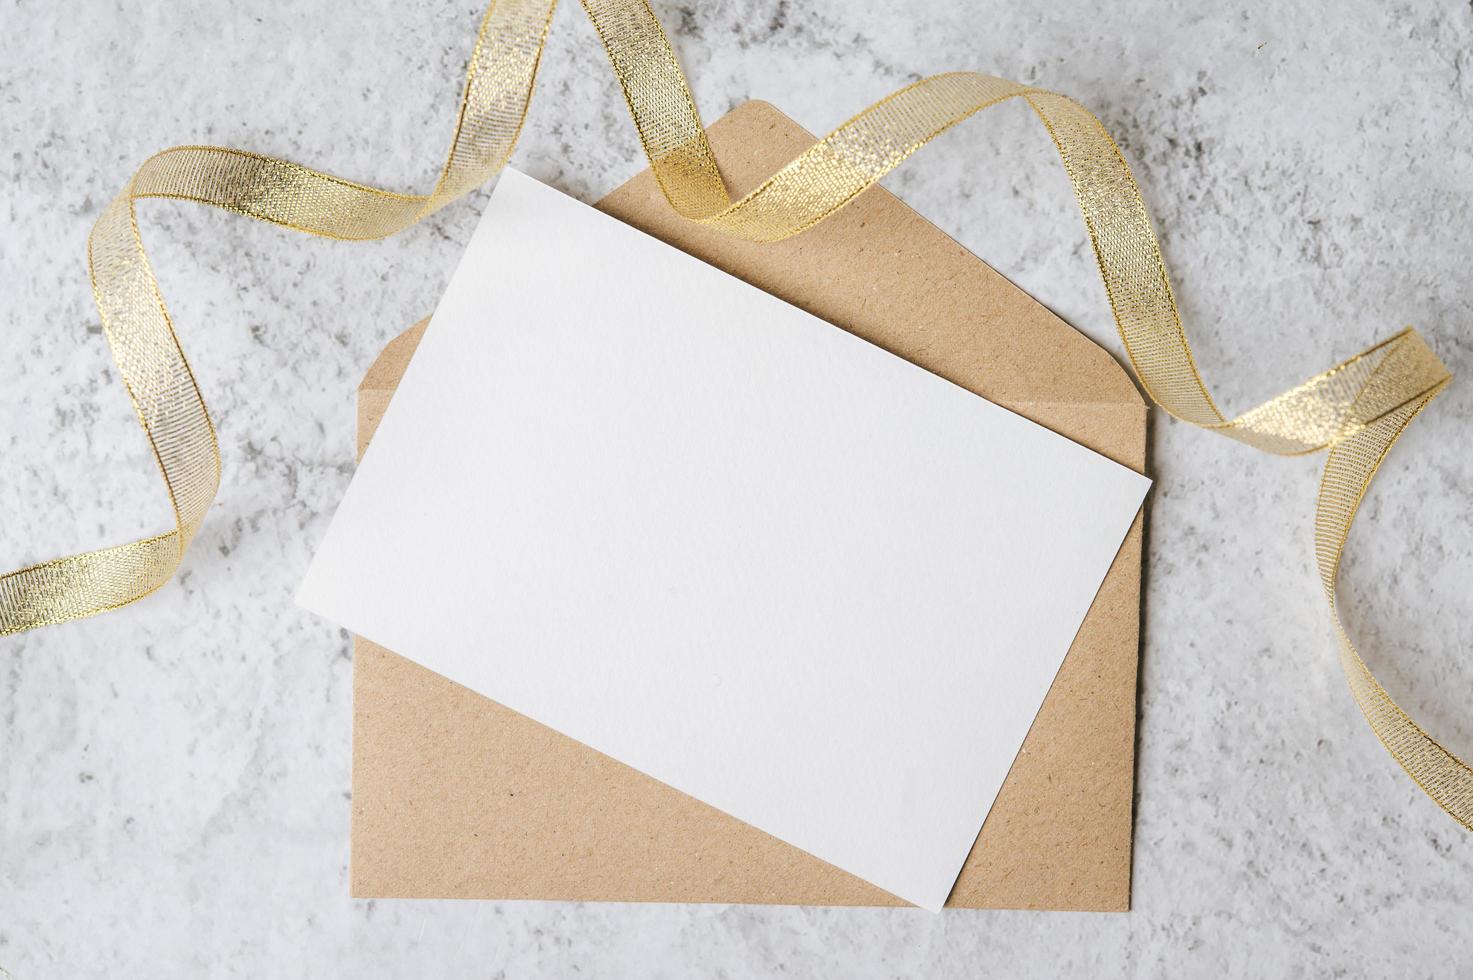 A blank card with envelope and leaf is placed on white background photo